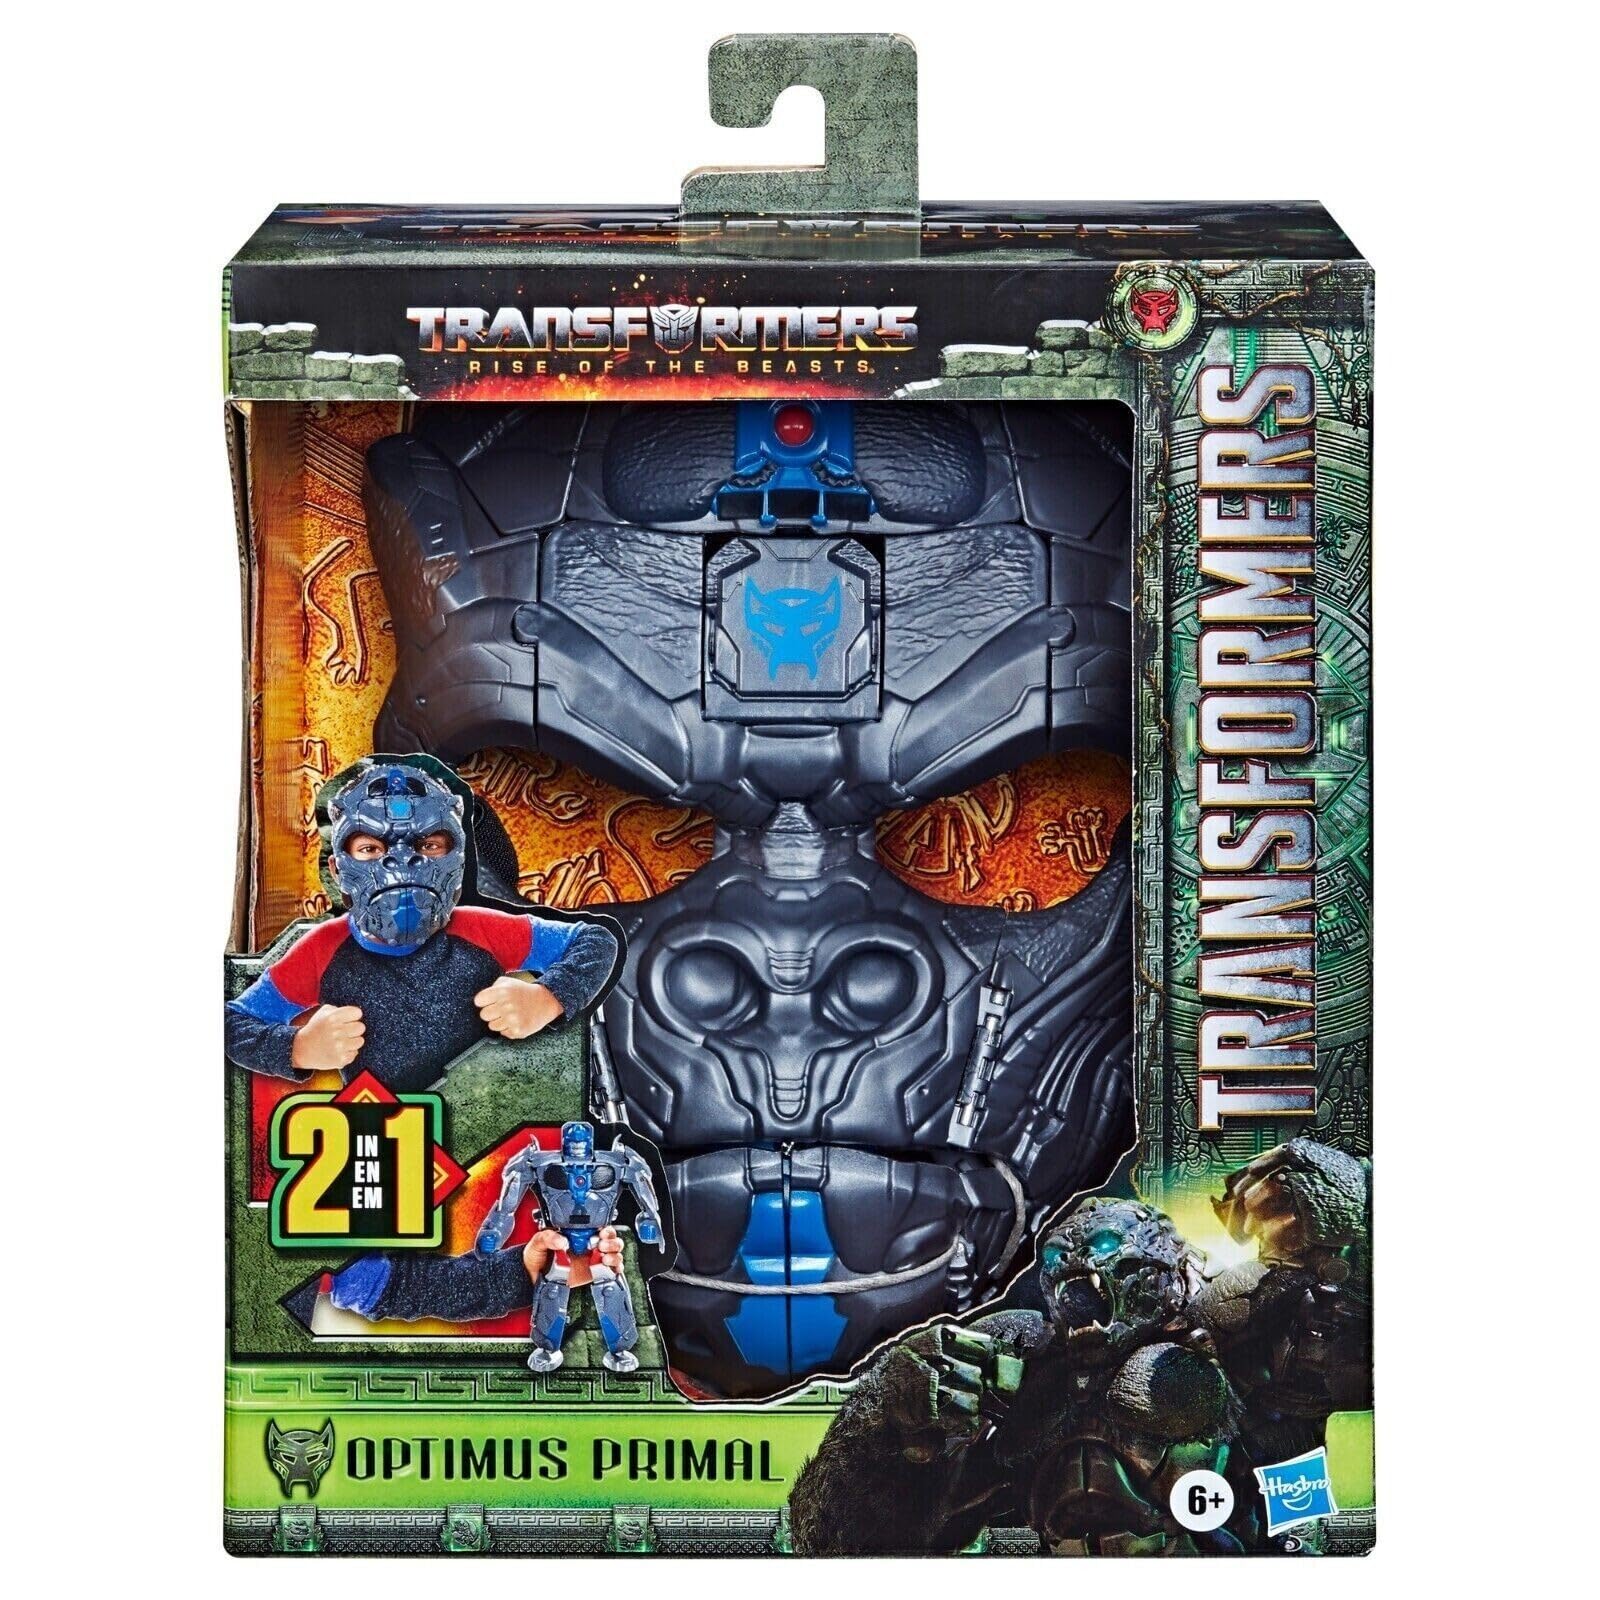 Transformers: Rise of the Beasts 2-in-1 Optimus Primal Role Play Toy Mask $12.46 + Free Shipping w/ Prime or on $35+